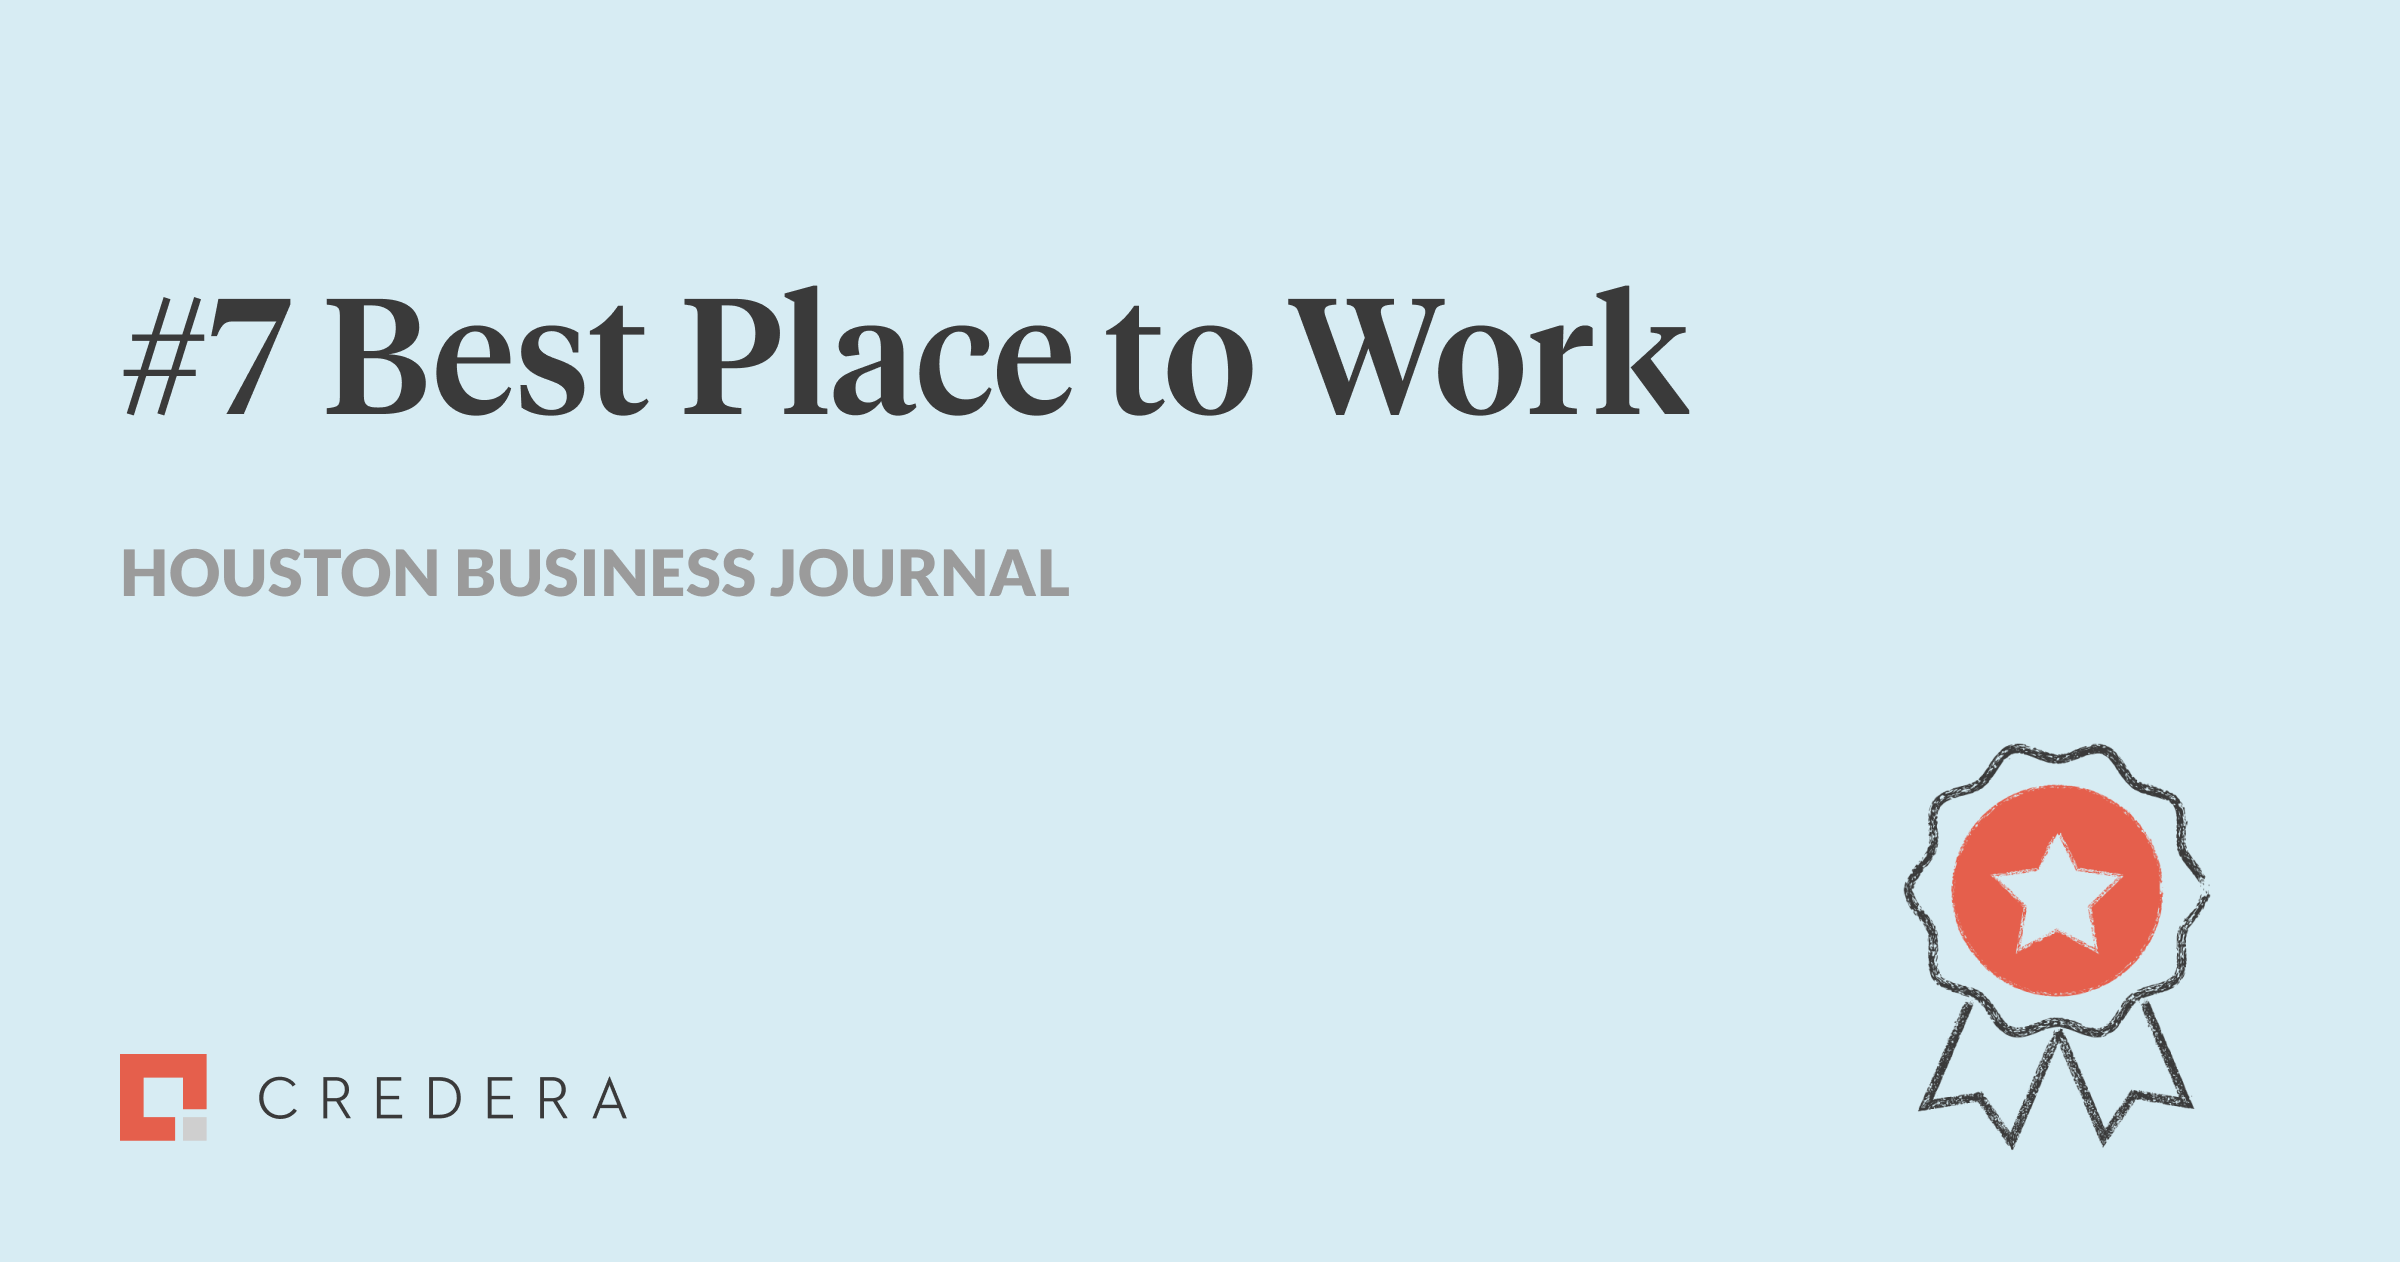 Credera Named to Houston Business Journal’s Best Place to Work List